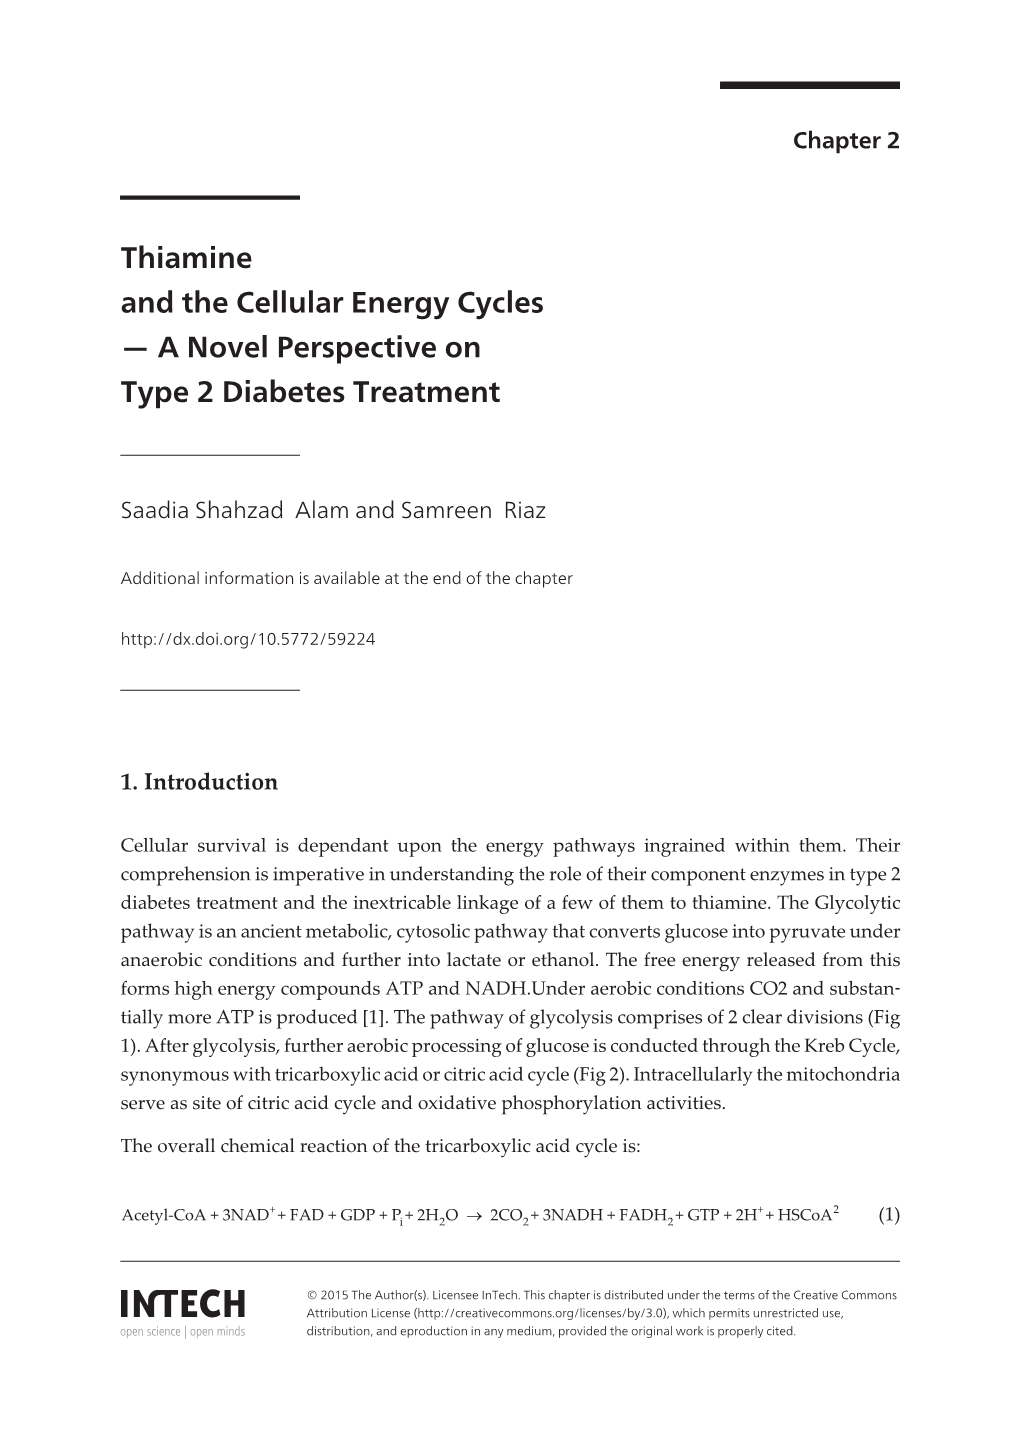 Thiamine and the Cellular Energy Cycles — a Novel Perspective on Type 2 Diabetes Treatment